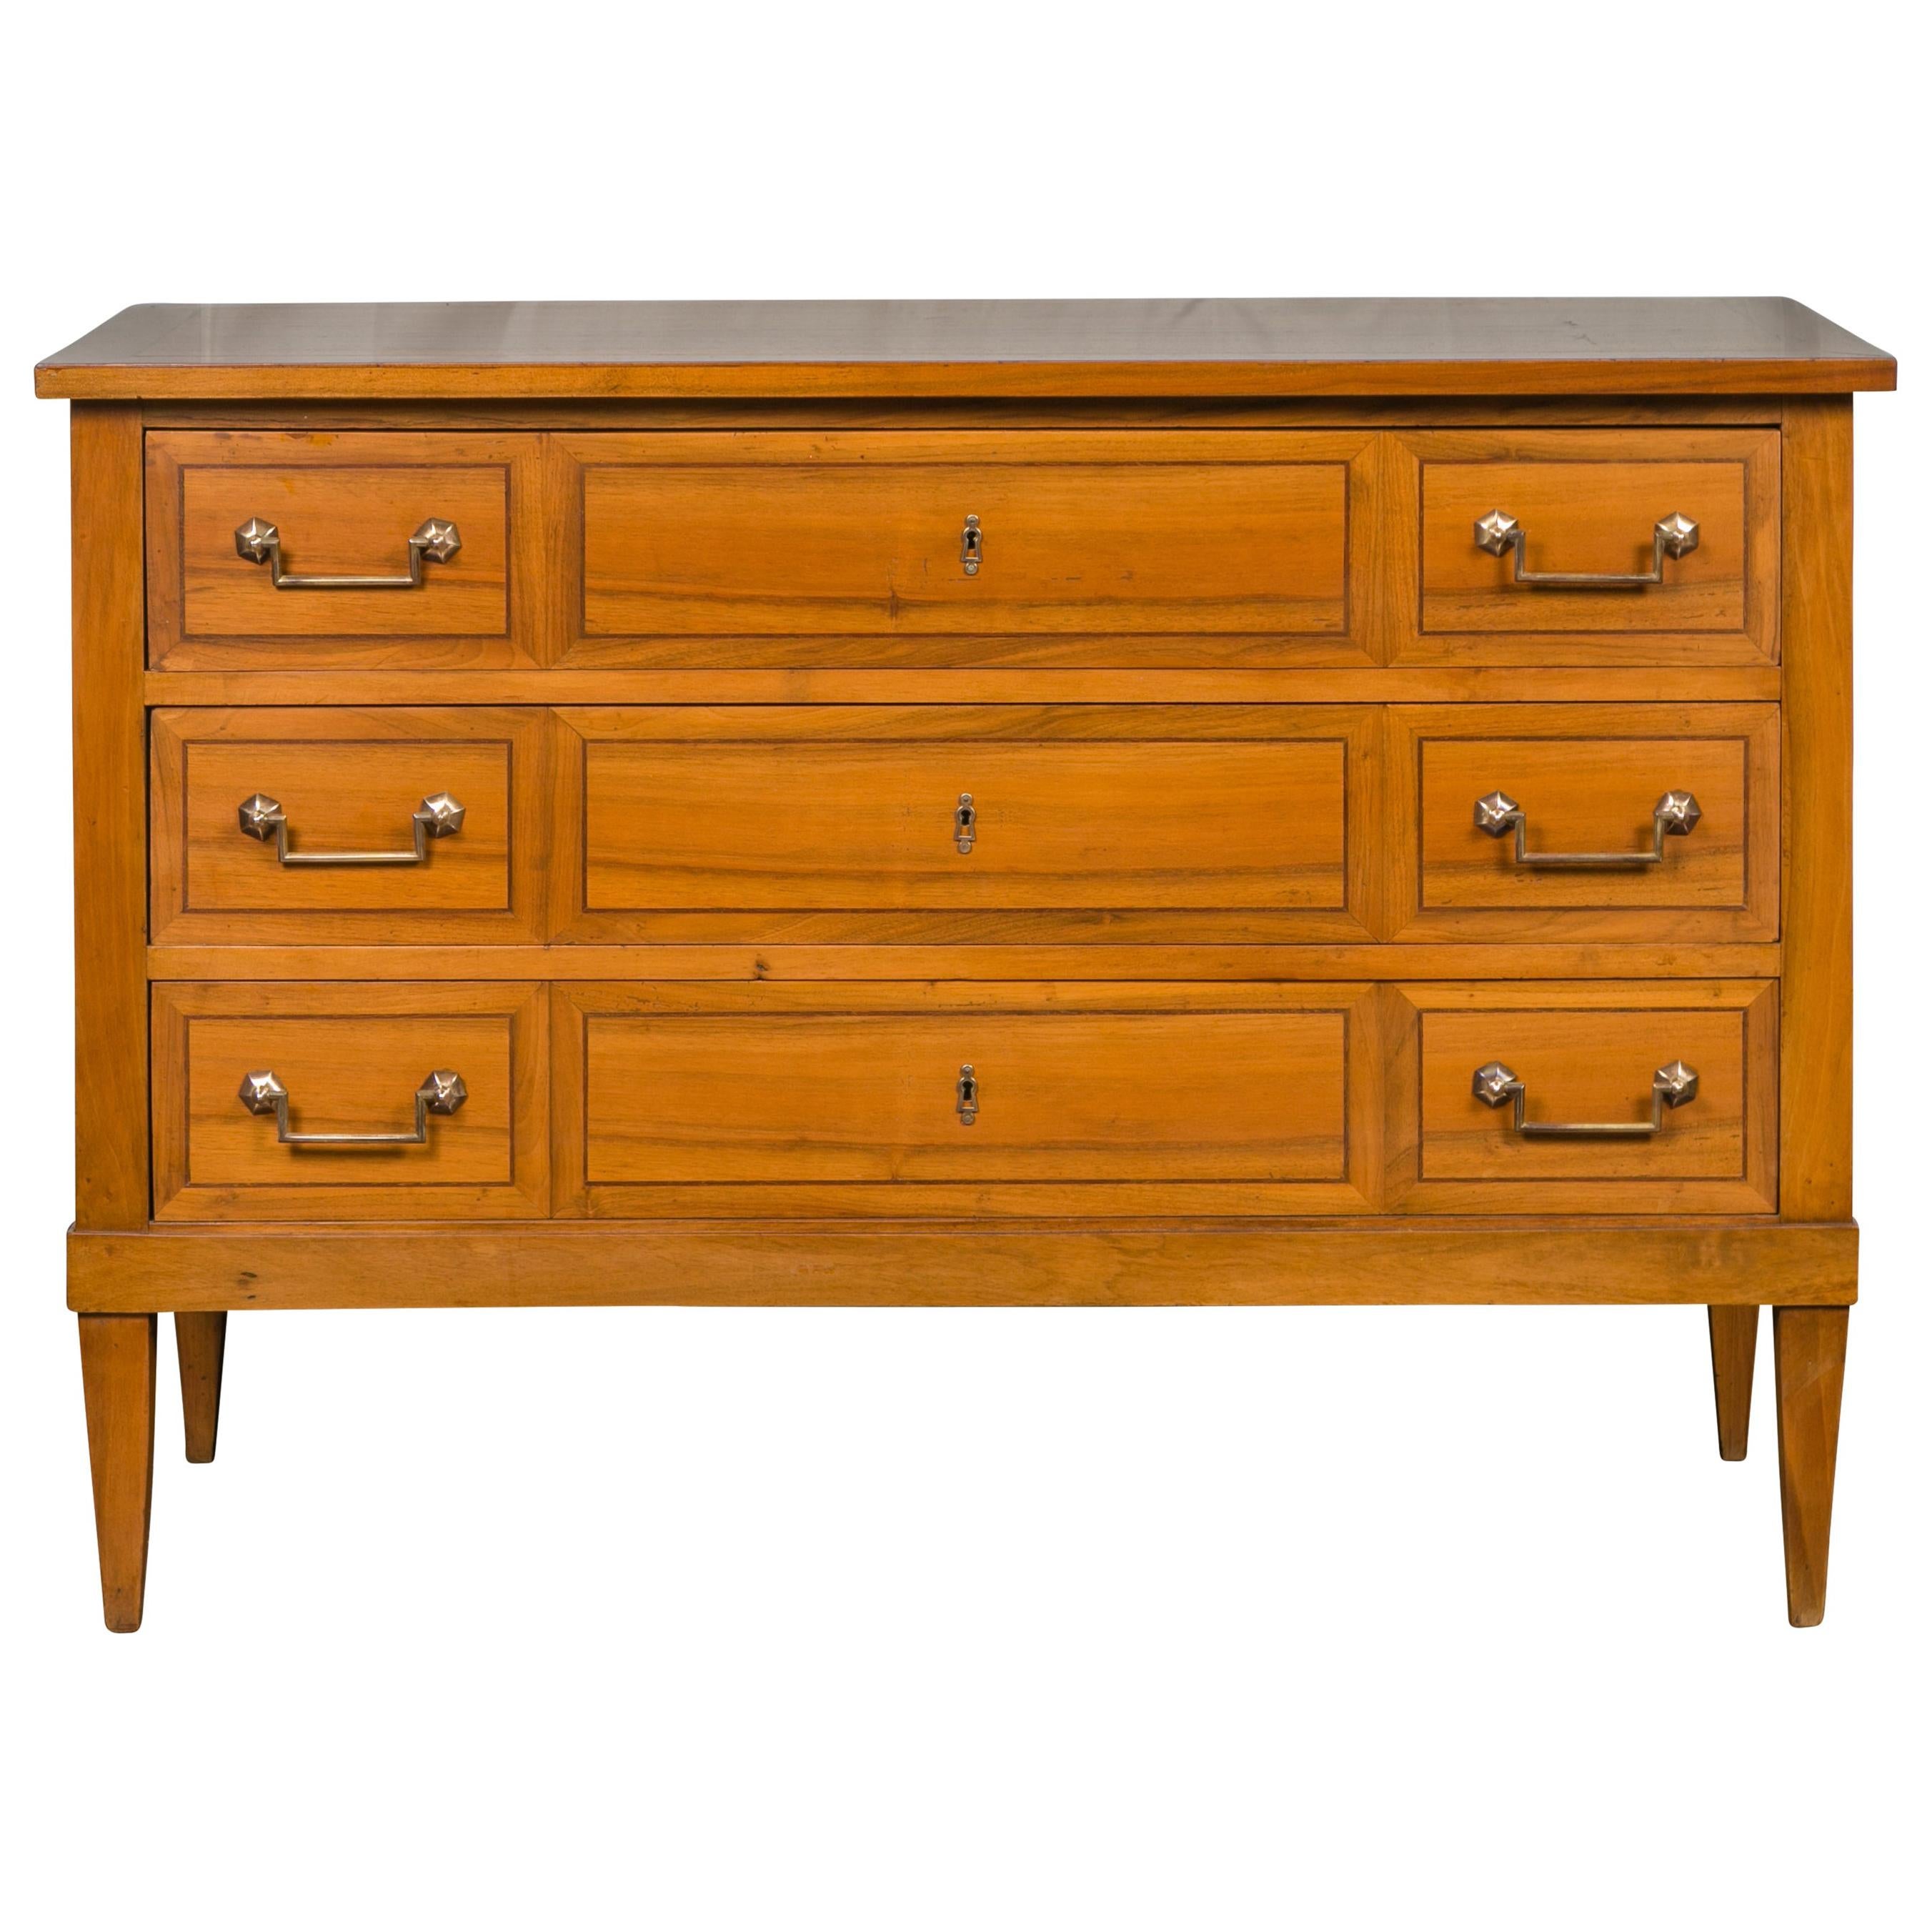 French 1900s Directoire Style Walnut Three-Drawer Commode with Banding